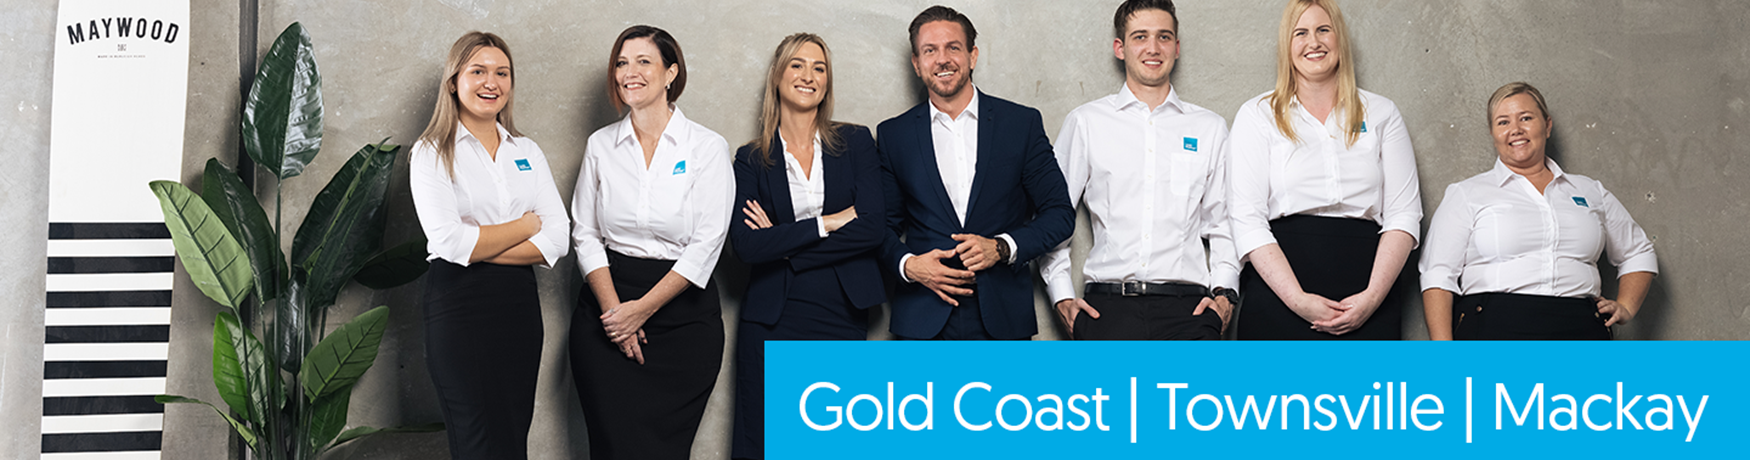 Loan Market Edge mortgage brokers and support team in Gold Coast, Townsville and Mackay